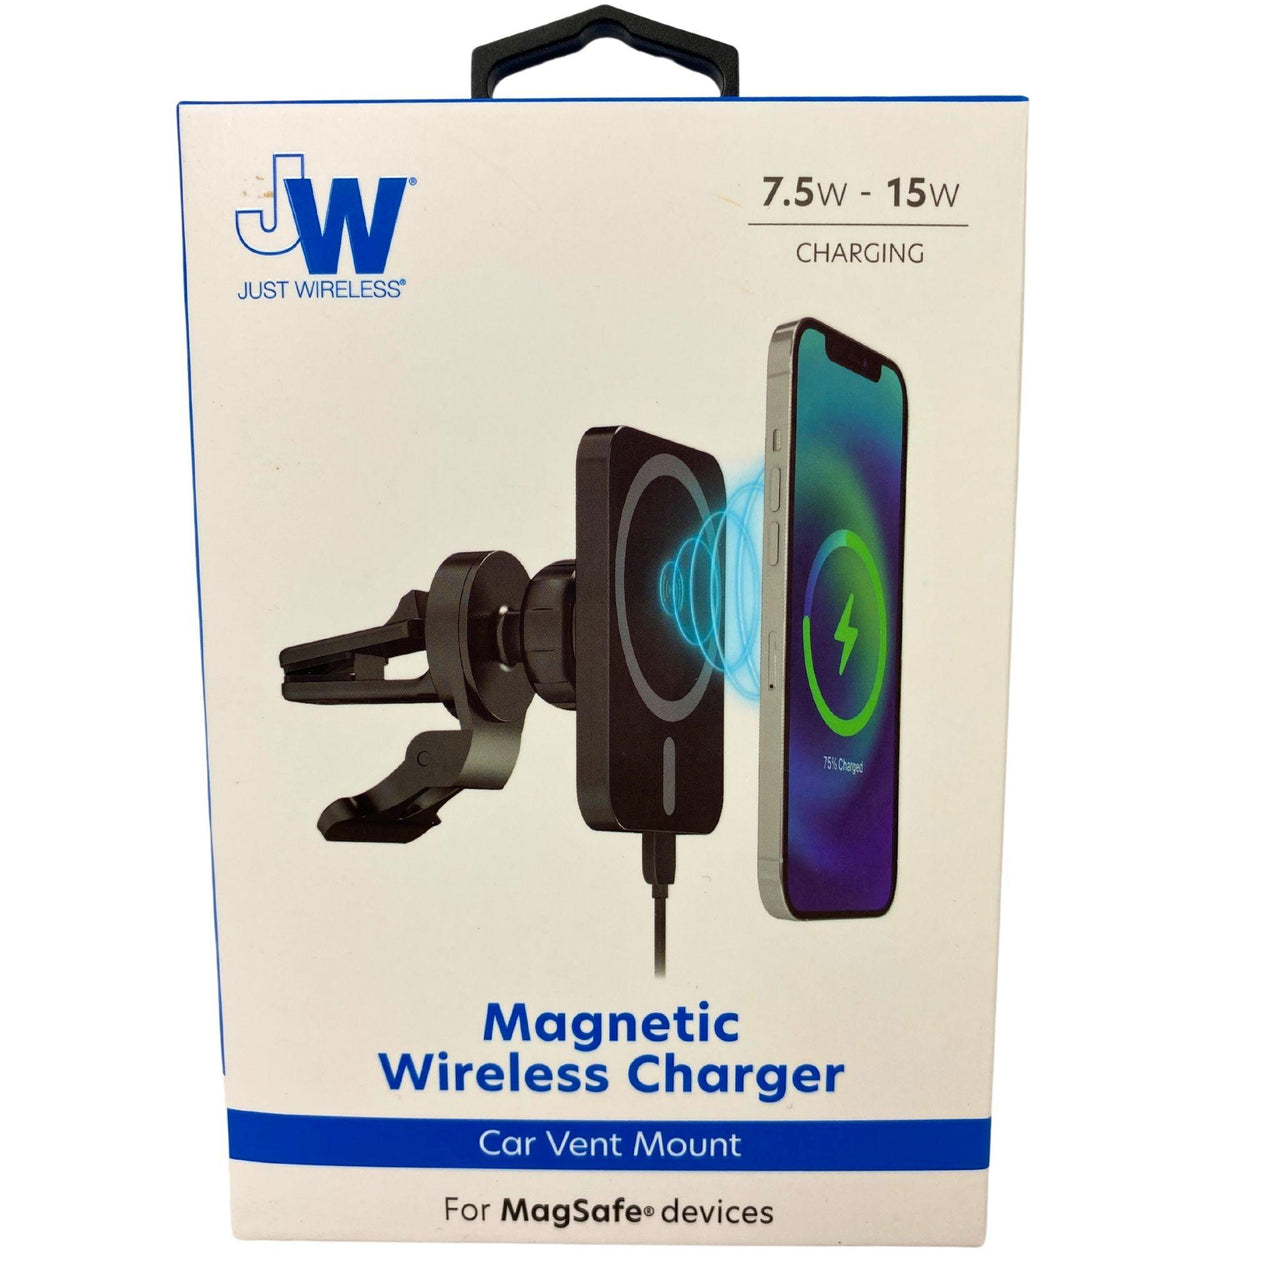 Magnetic Wireless Charger Car Vent Mount for Magsafe Devices 7.5w - 15 w Charging (60 Pcs Lot) - Discount Wholesalers Inc